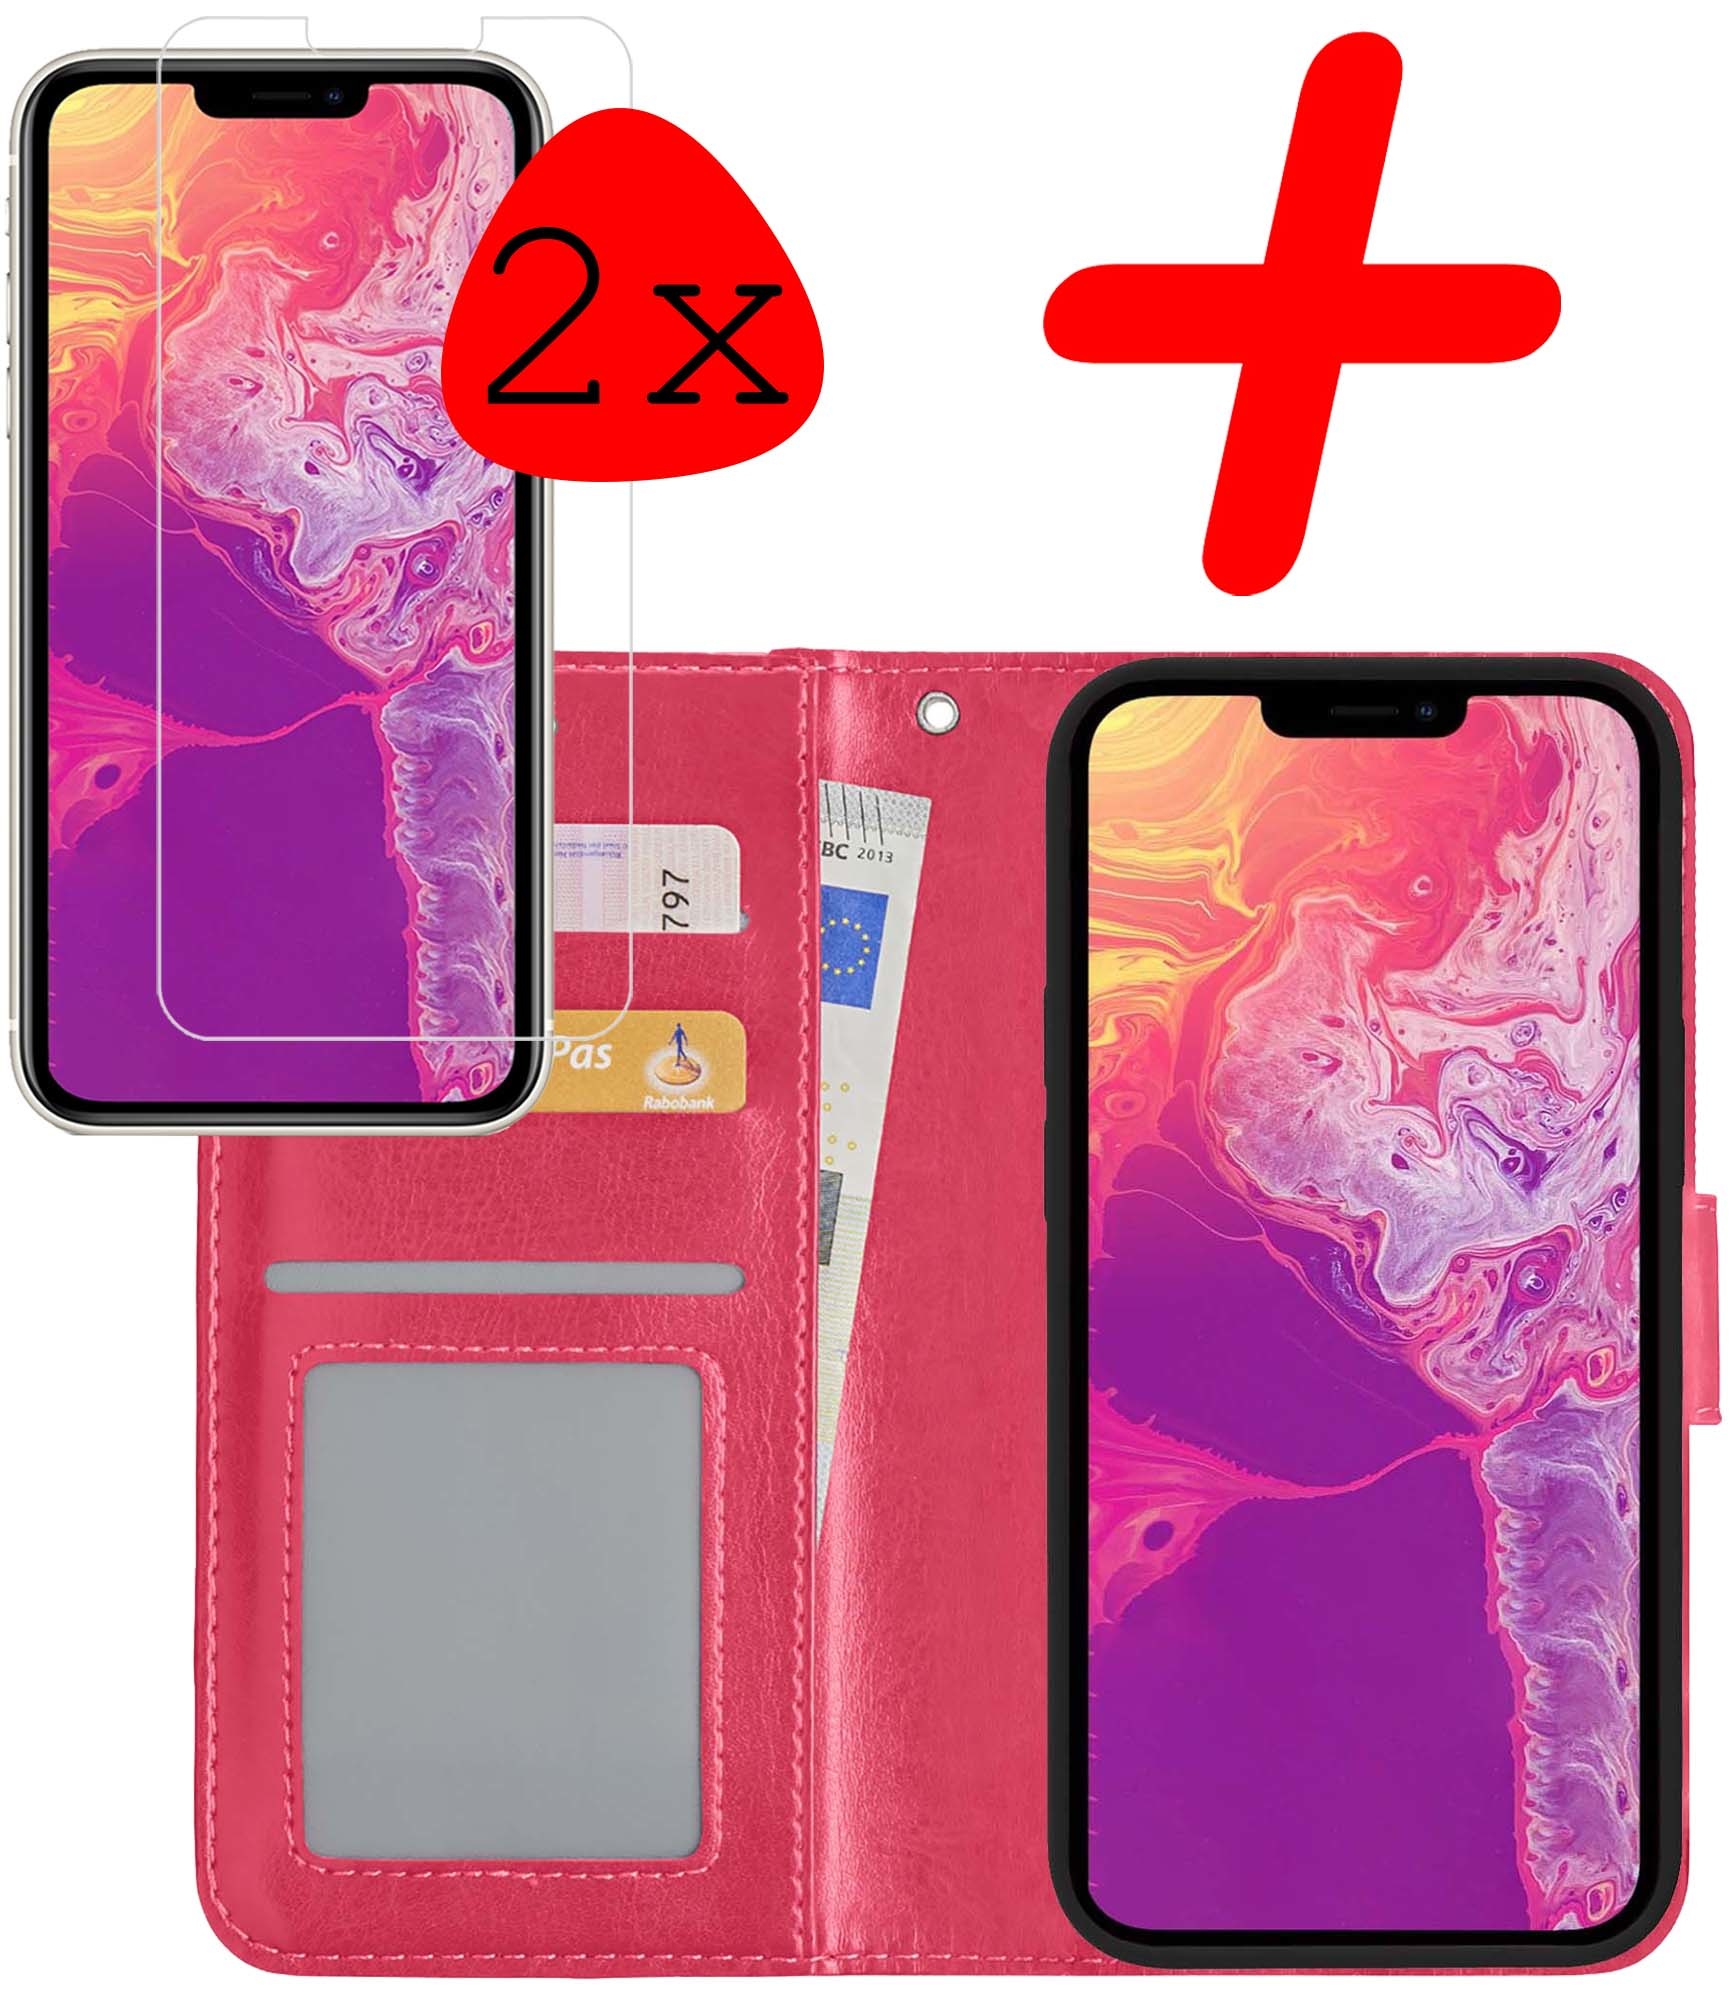 BASEY. iPhone 13 Pro Max Hoesje Bookcase 2x Screenprotector - iPhone 13 Pro Max Case Hoes Cover - iPhone 13 Pro Max Screenprotector 2x - Donker roze